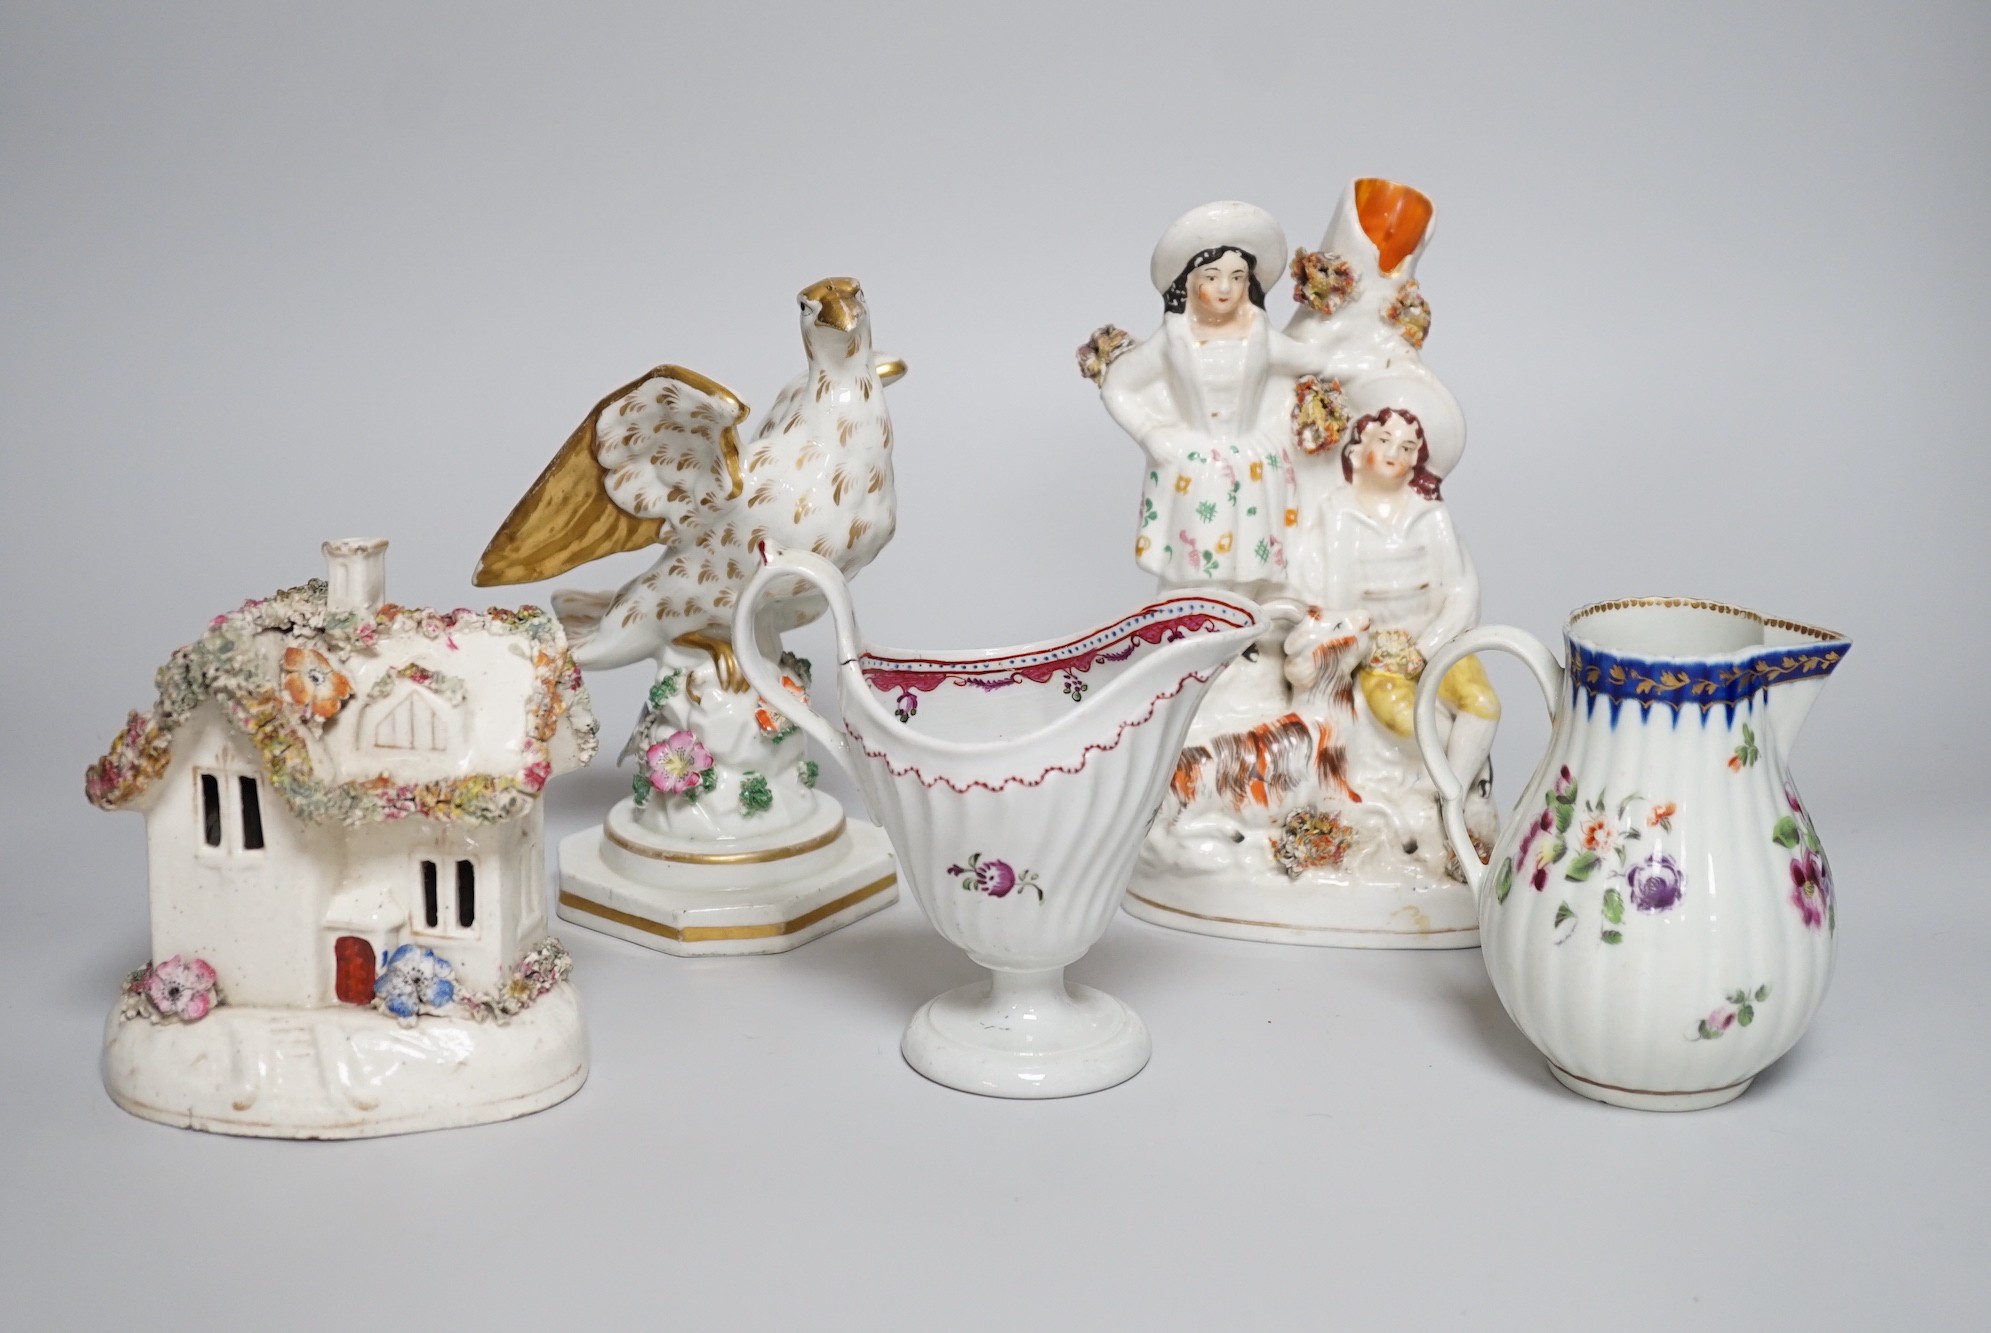 A Worcester milk jug, c.1780, a Newhall-type cream jug, c.1795, a Staffordshire porcelain model of